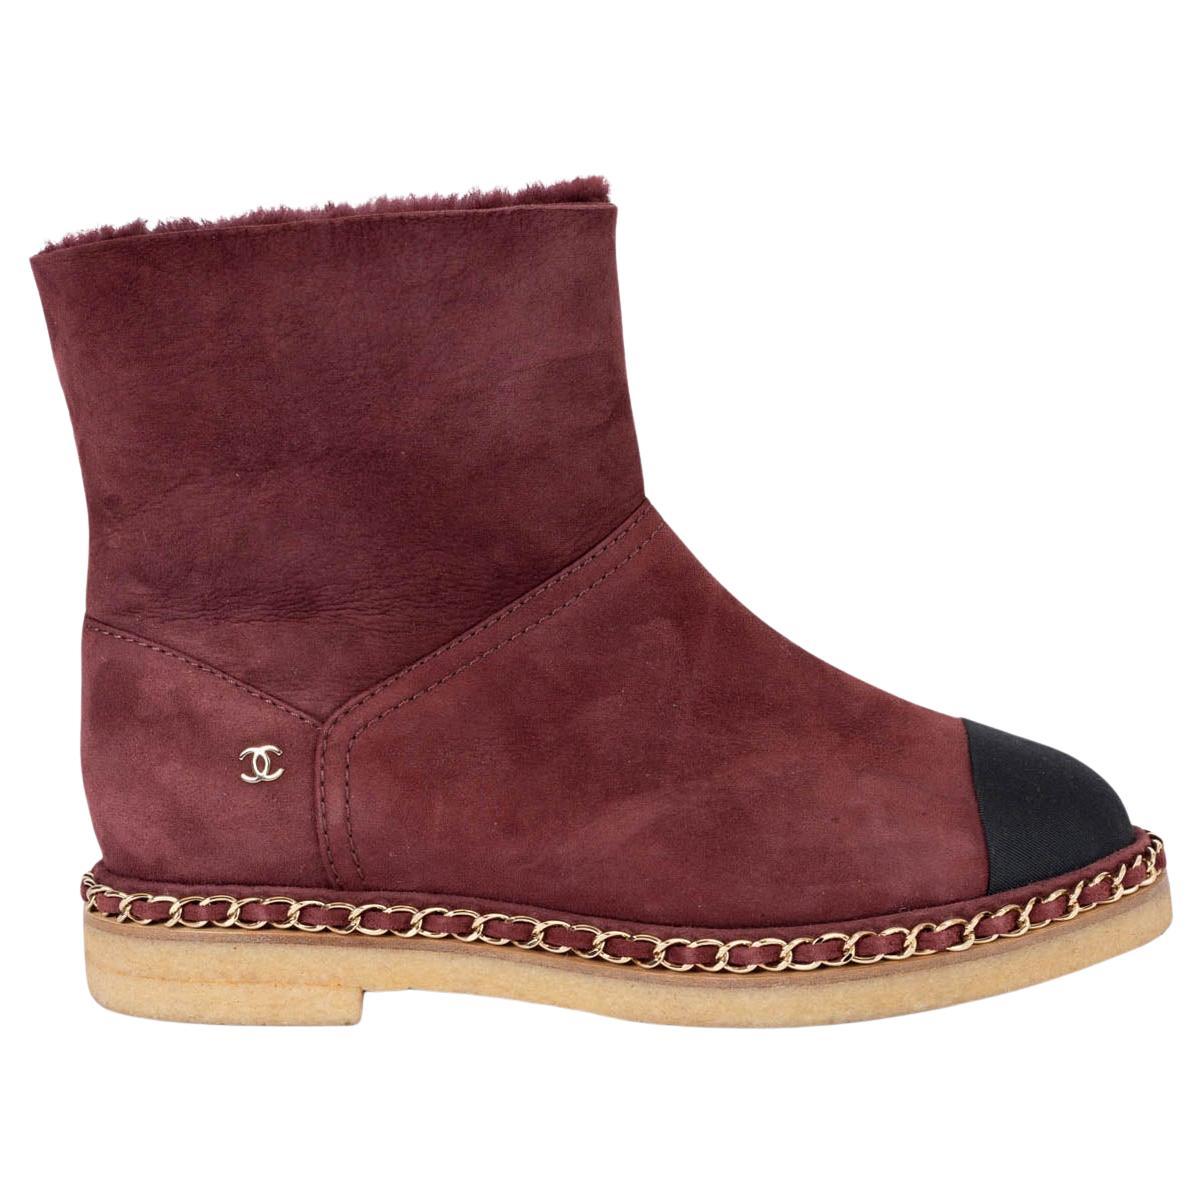 CHANEL burgundy suede 2019 19B SHEARLING LINED Boots Shoes 37 For Sale